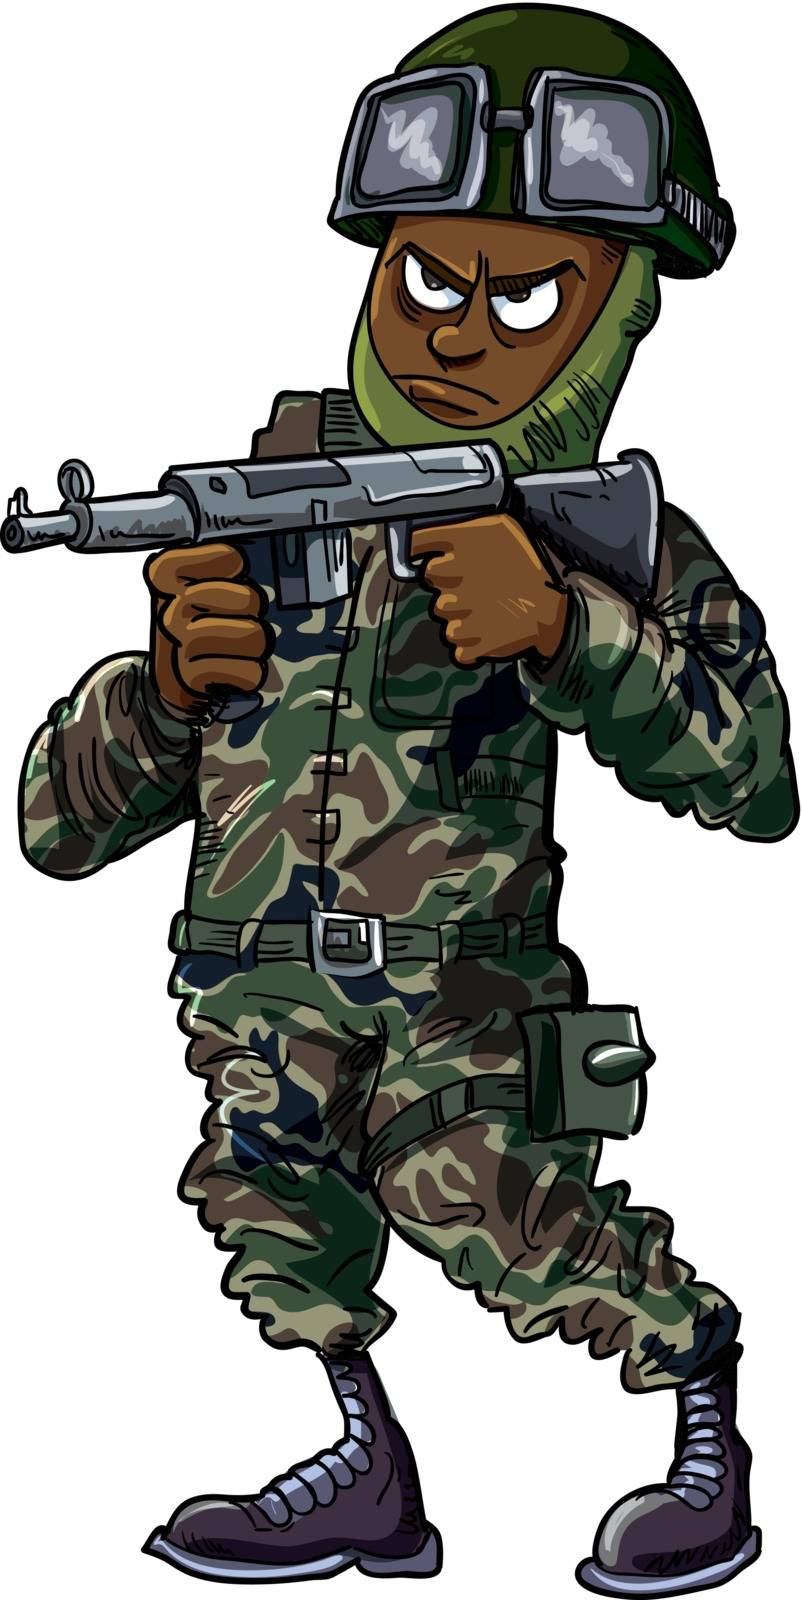 Black cartoon soldier with gun. Isolated on white